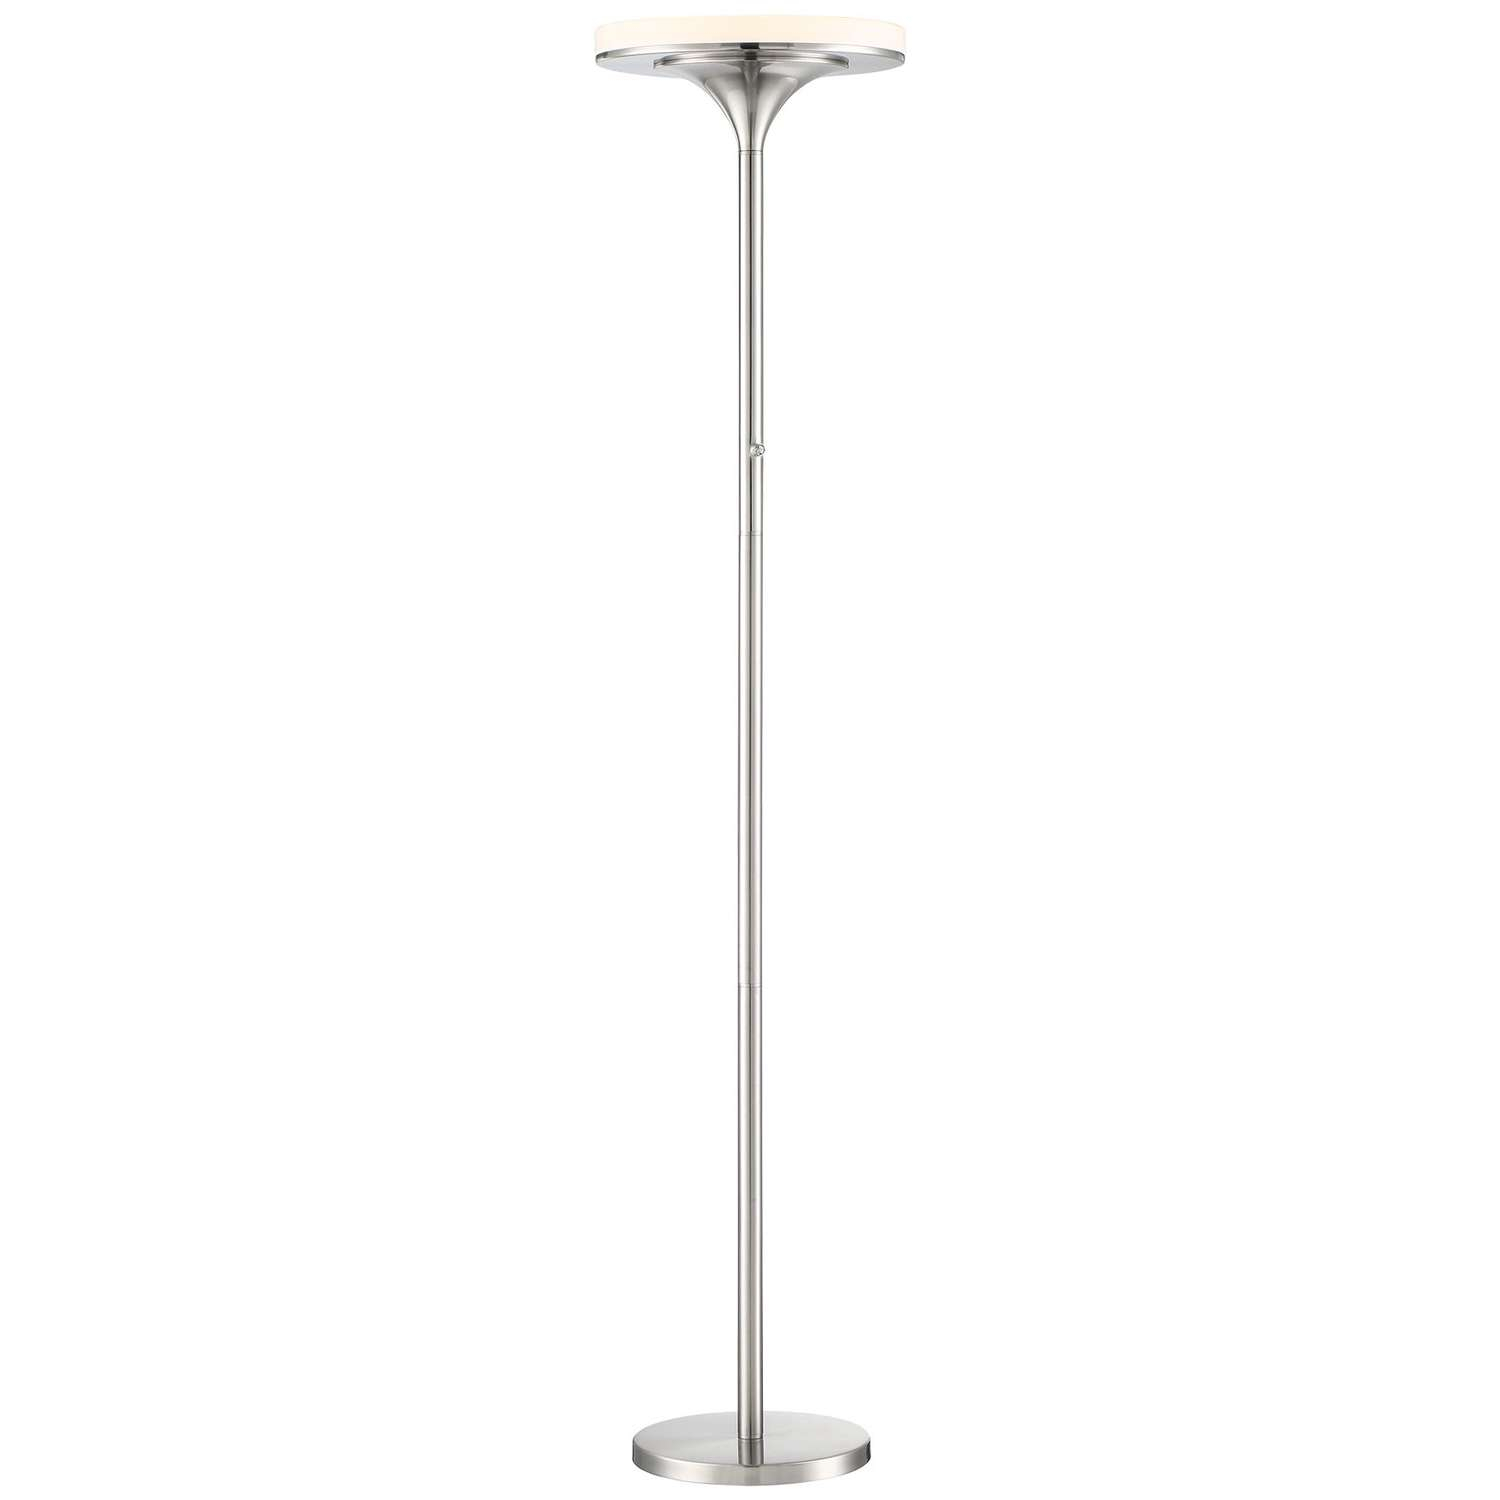 Uho Floor Lamp George Kovacs Torchiere Lamps Ylighting with regard to size 1500 X 1500